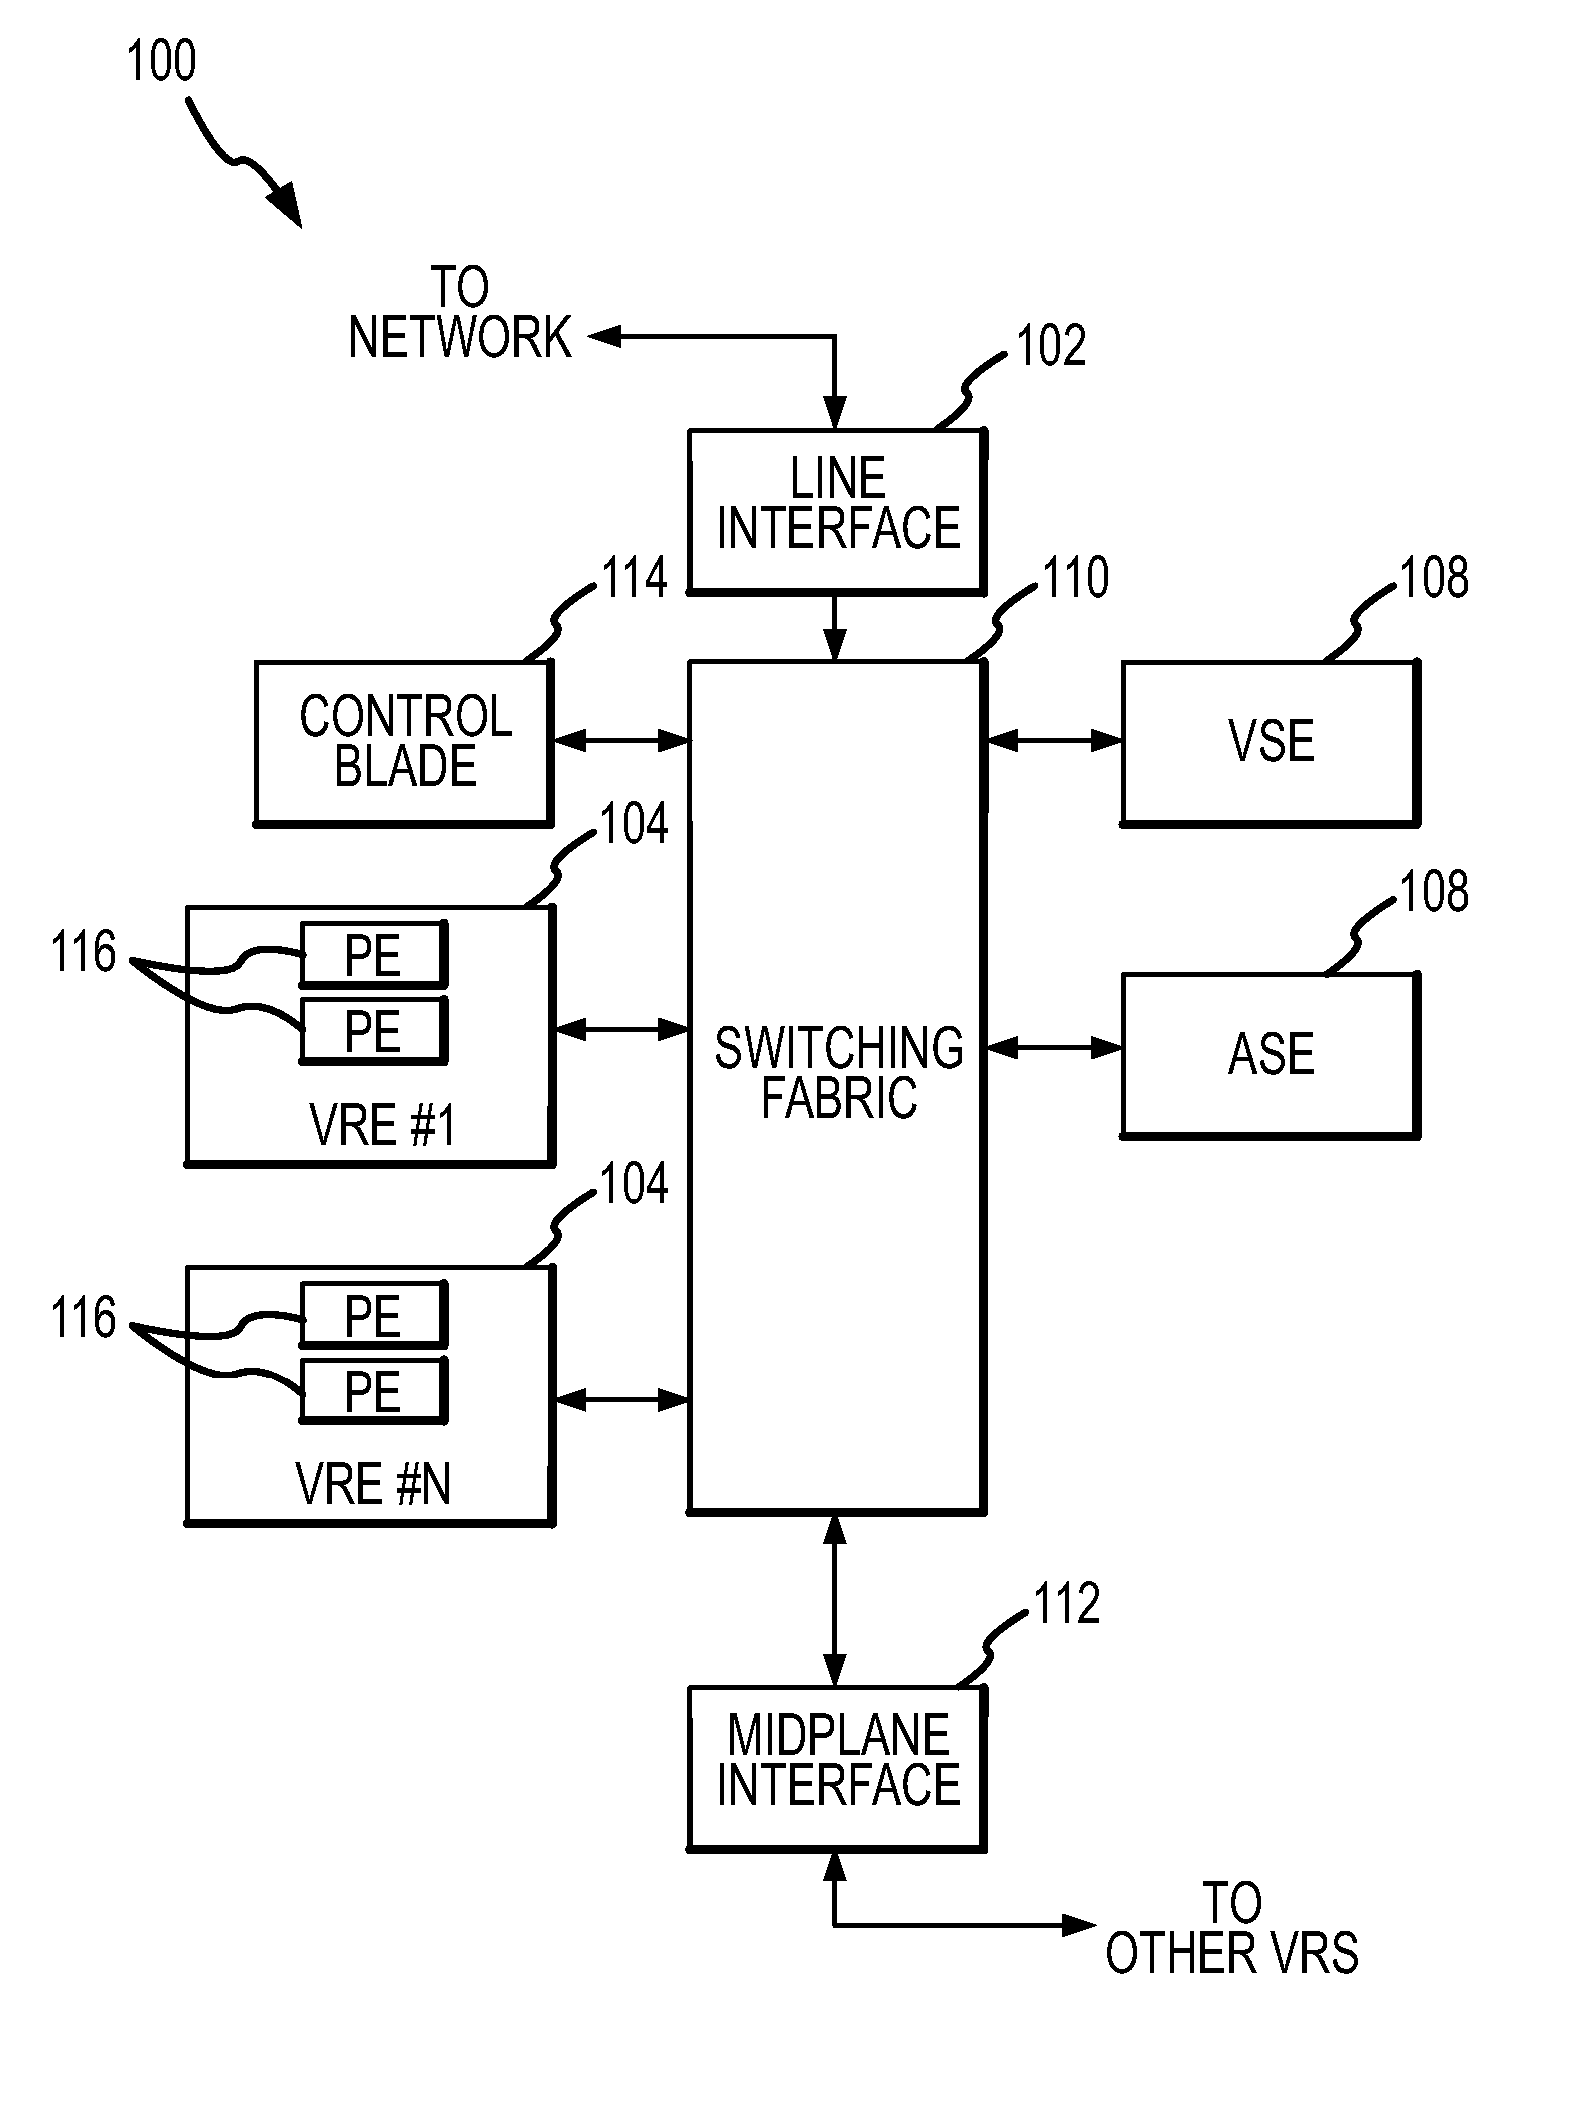 Hardware-accelerated packet multicasting in a virtual routing system